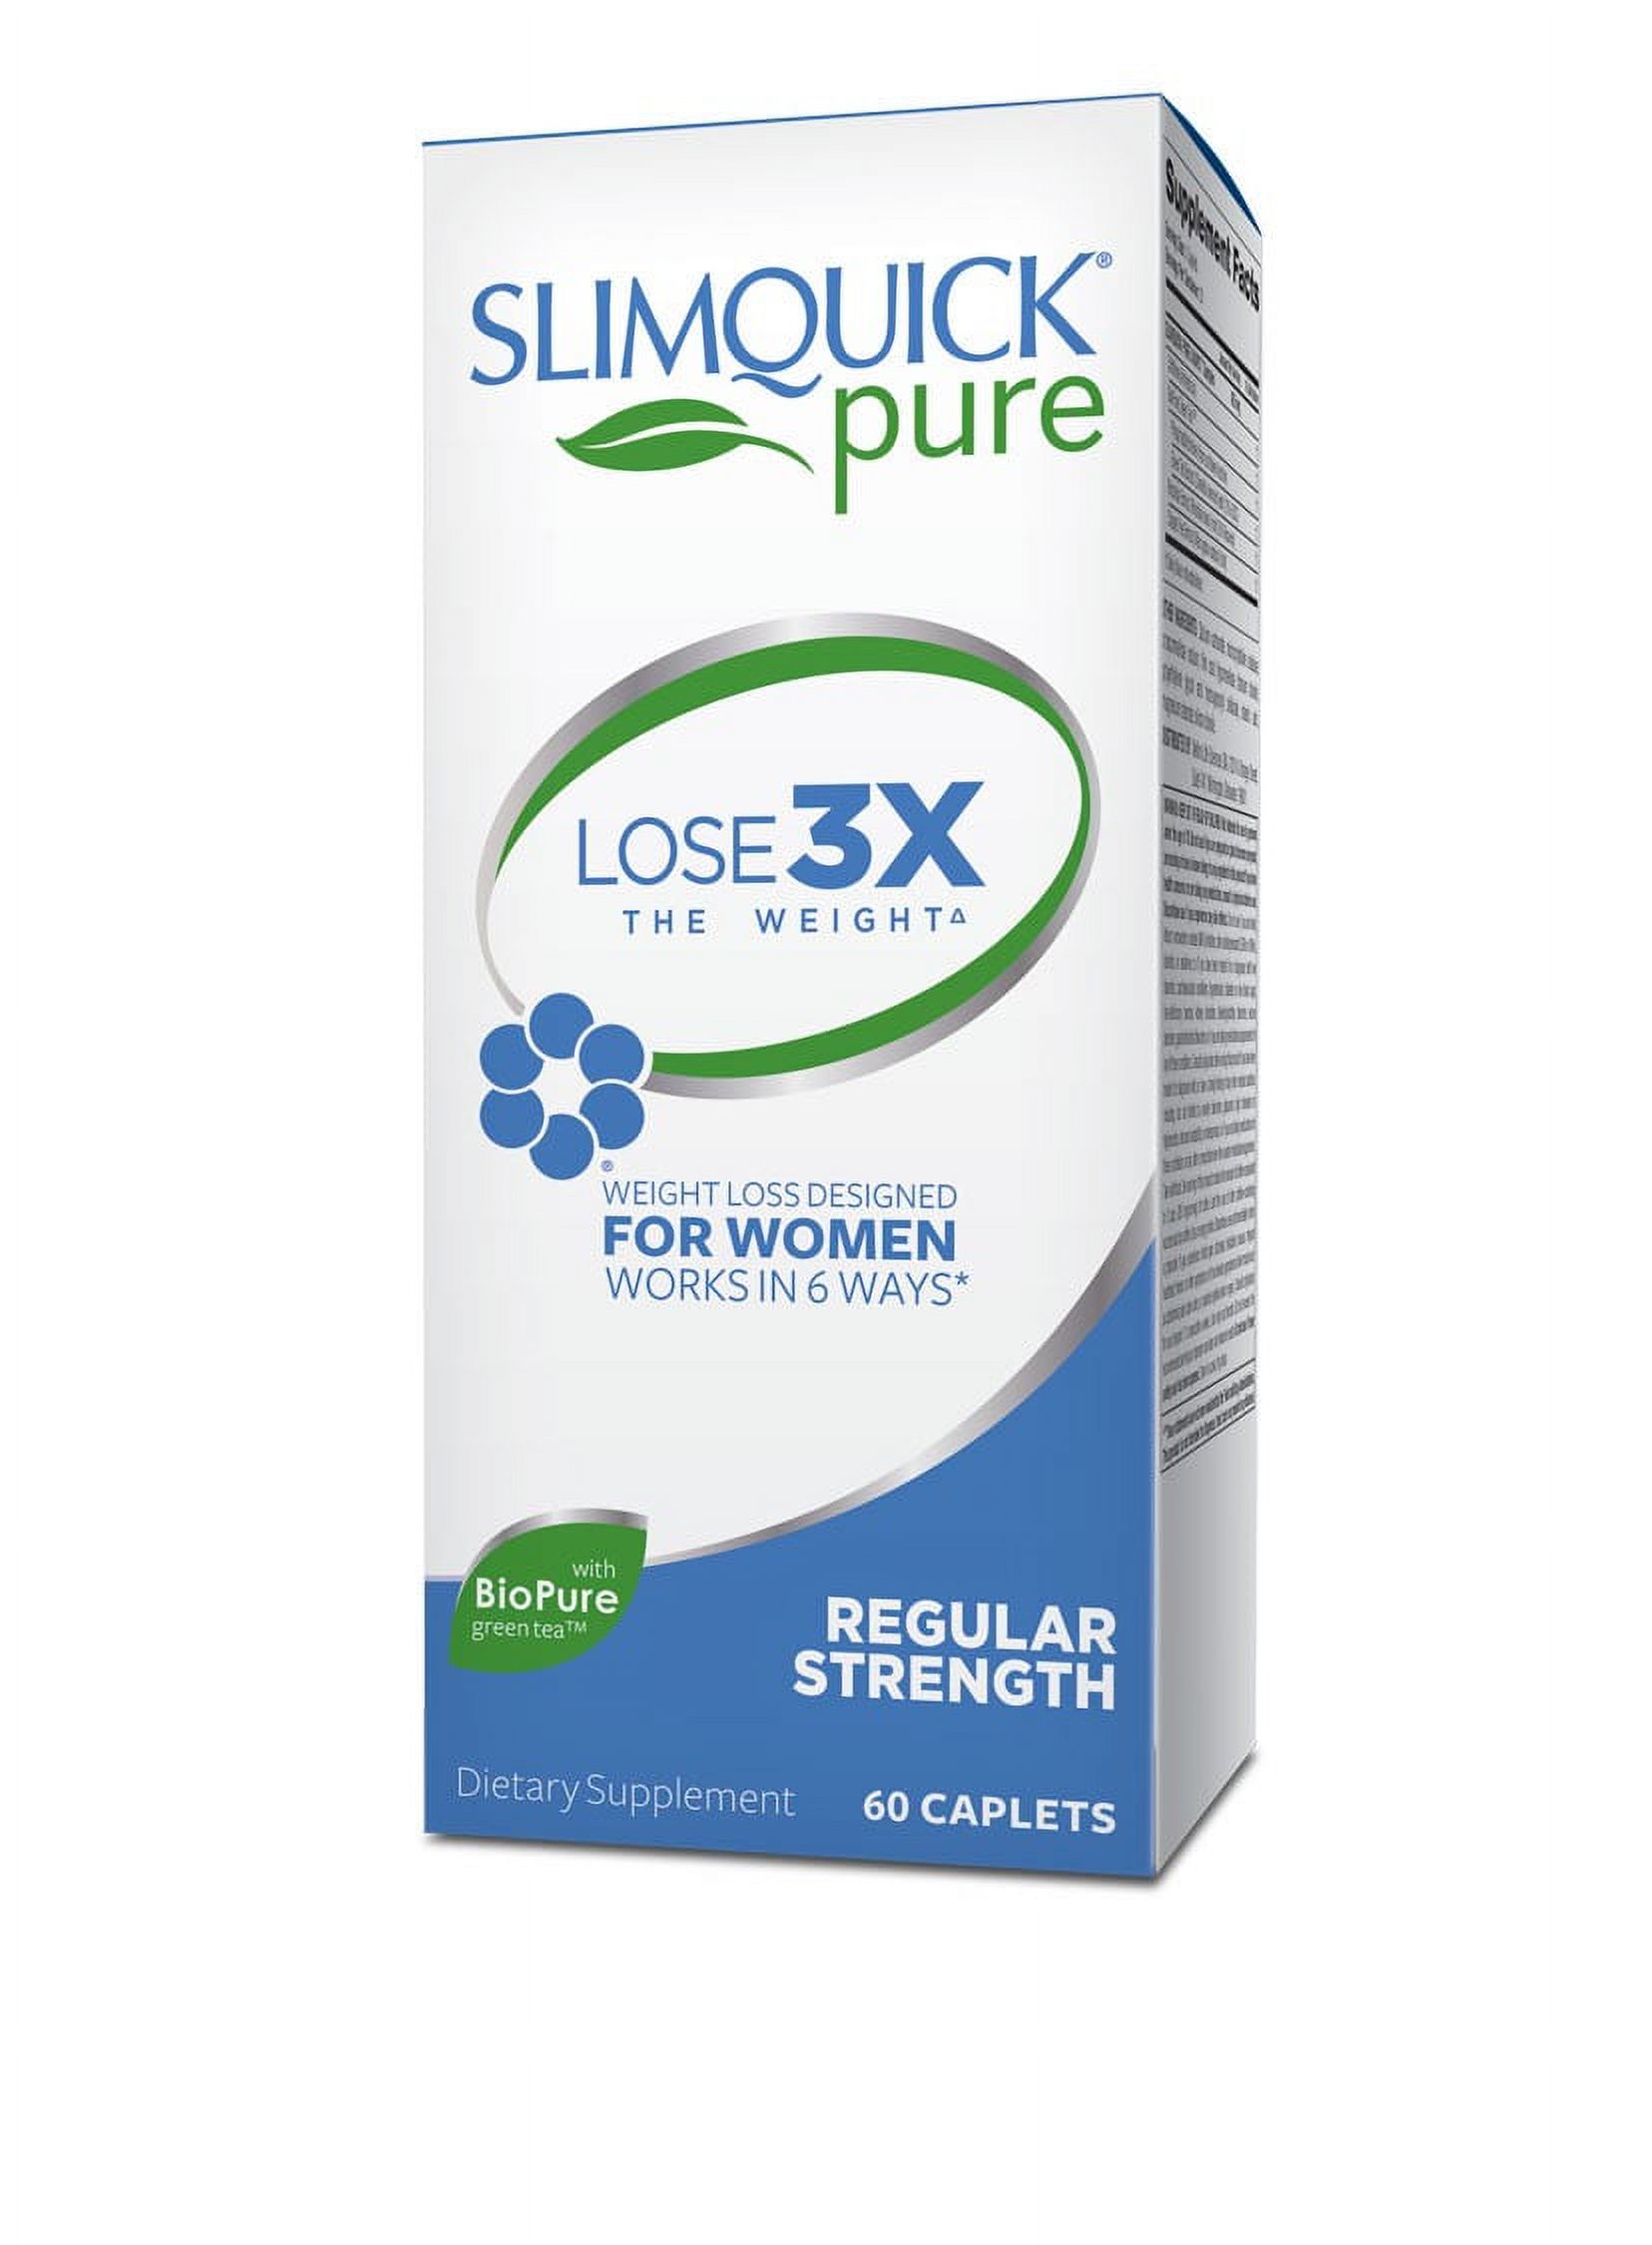 Slimquick Pure Weight Loss For Women Appetite Suppressant & Metabolism Booster Weight Loss, 60 Ct - image 1 of 2